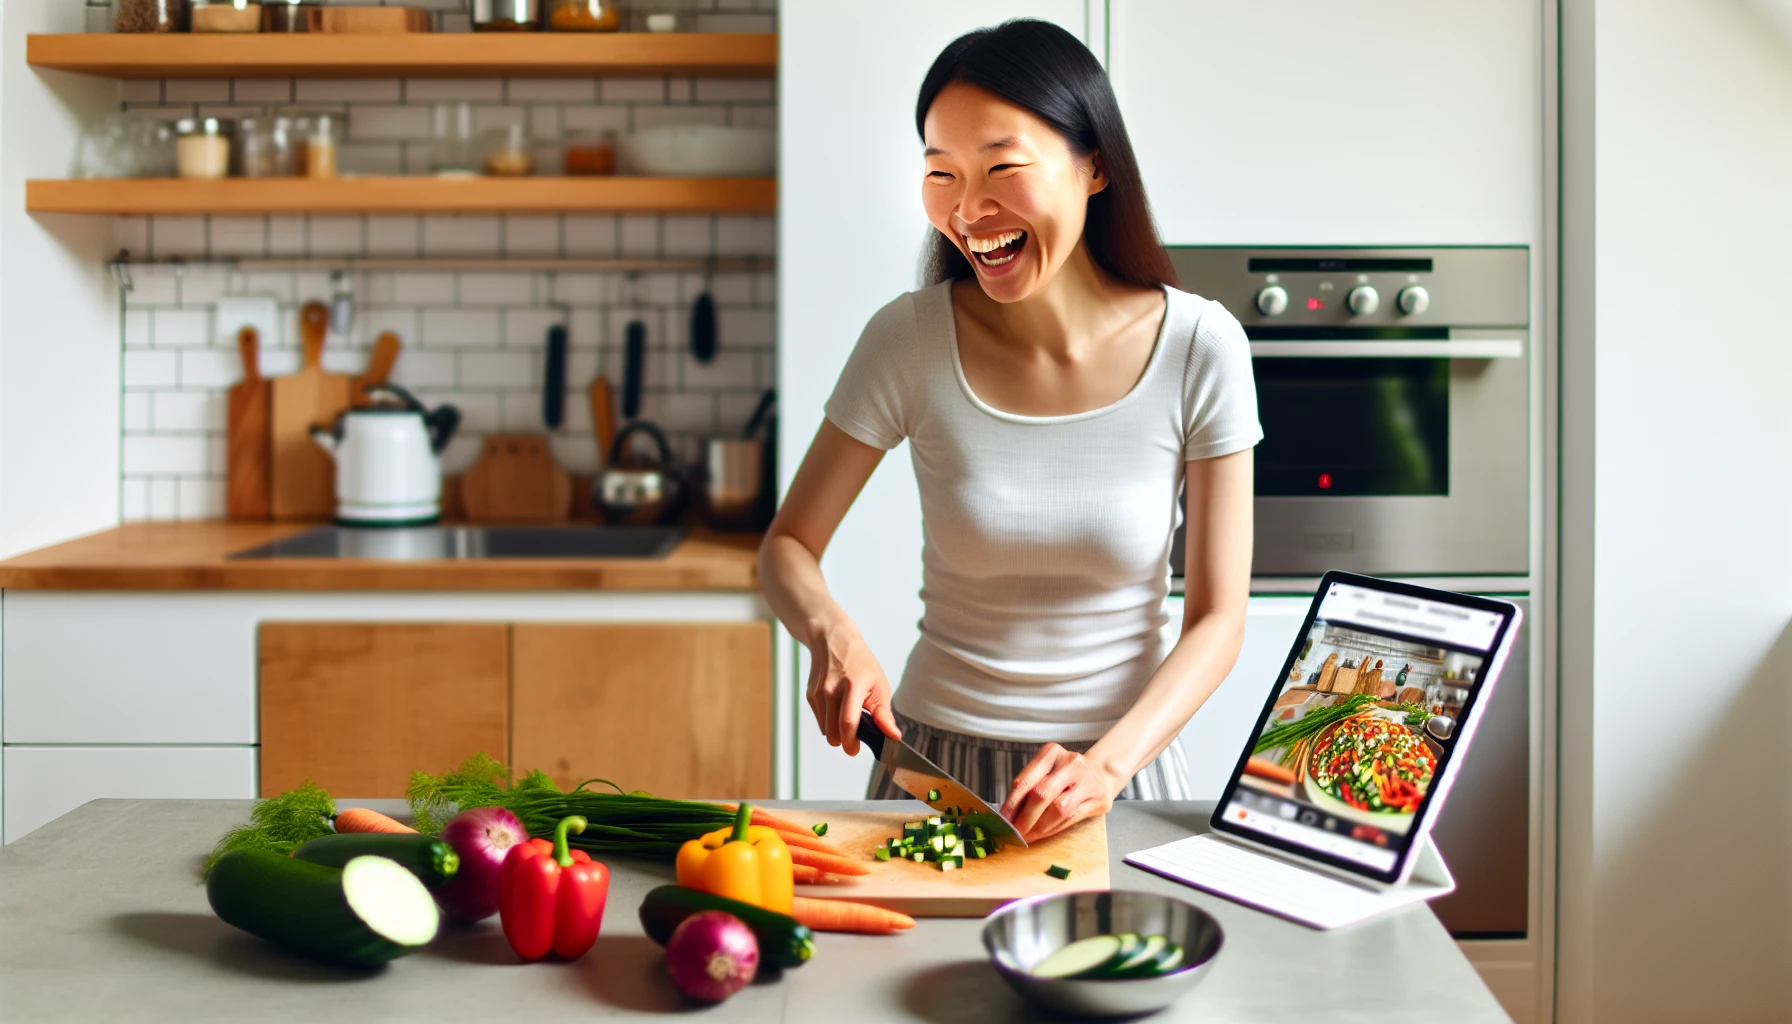 A person happily cooking with fresh ingredients, embracing the AI-generated recipes and reducing food waste